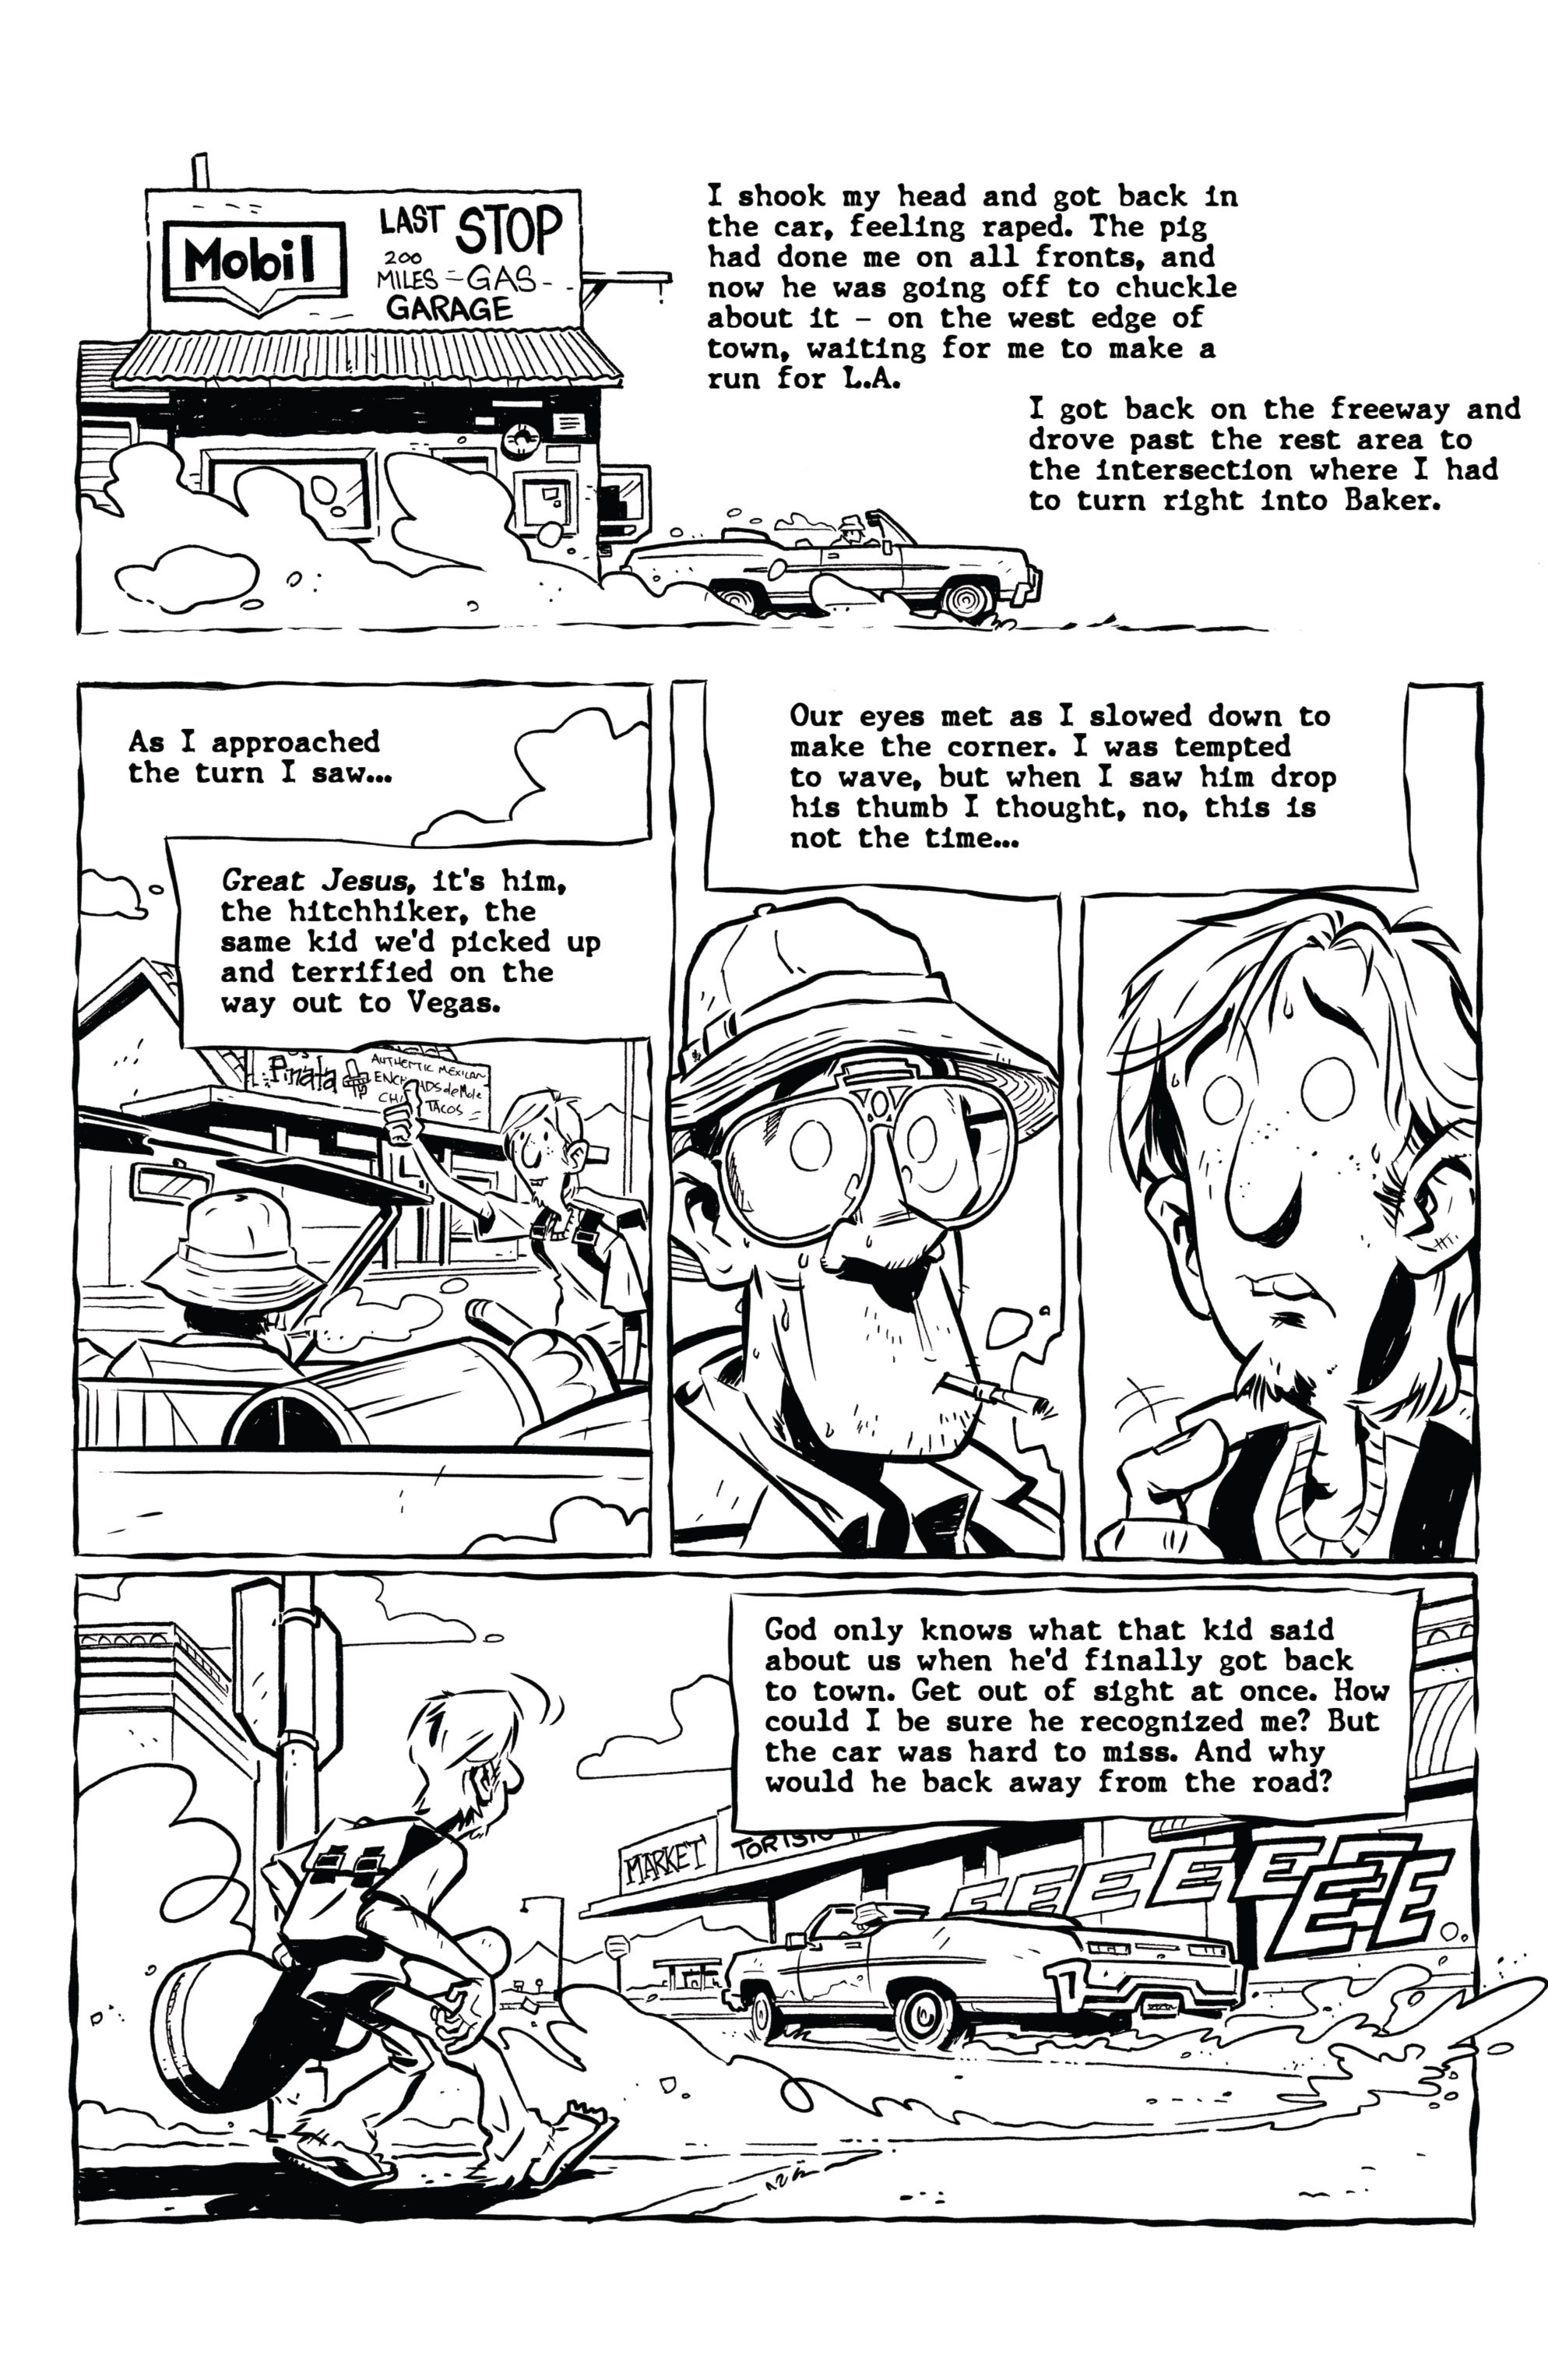 Read online Hunter S. Thompson's Fear and Loathing in Las Vegas comic -  Issue #3 - 10